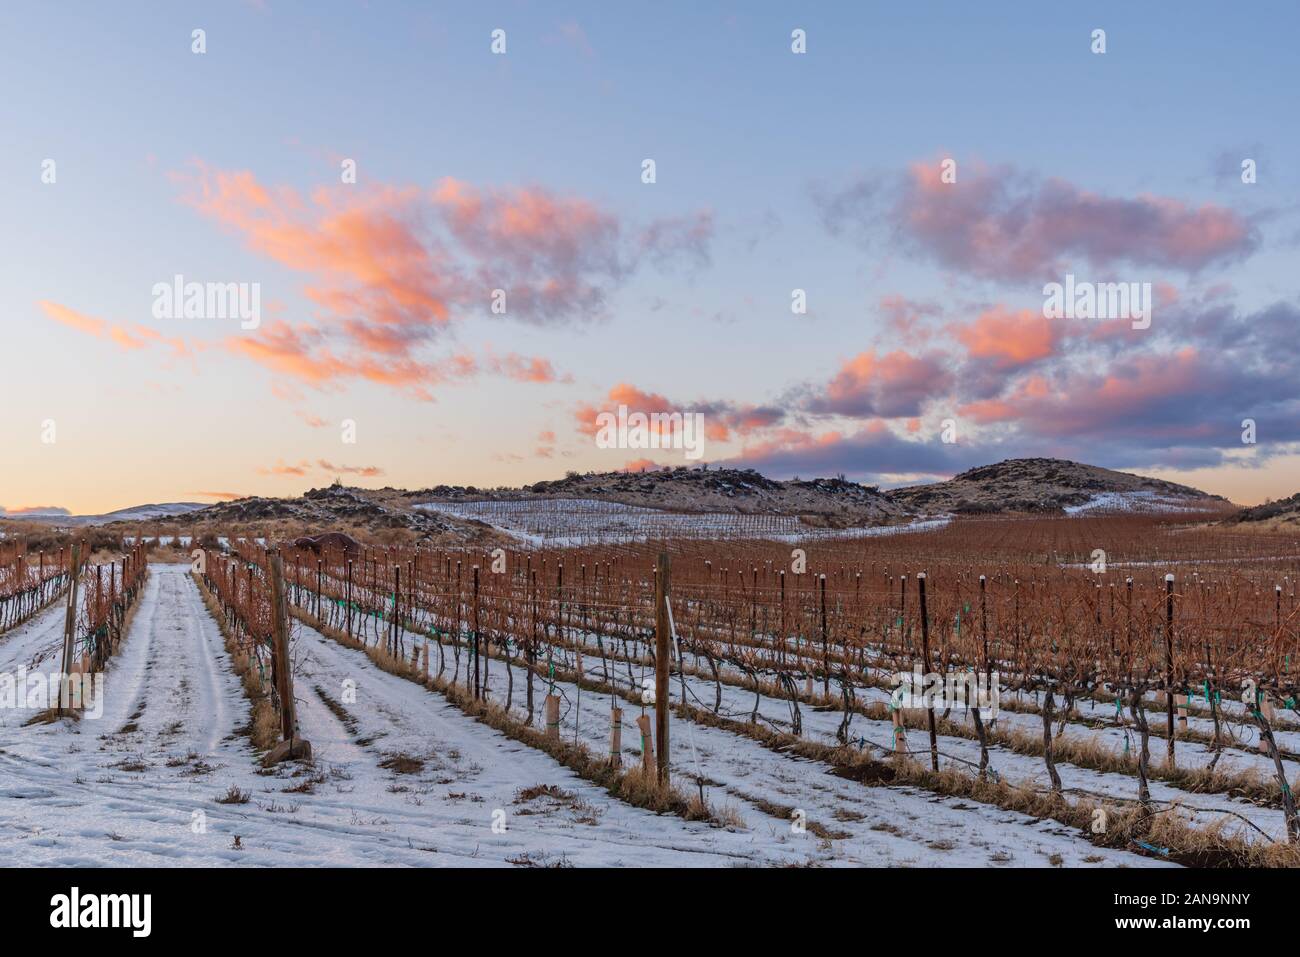 Colorful sunset over a snow covered vineyard in eastern washington with mountains in the distance Stock Photo